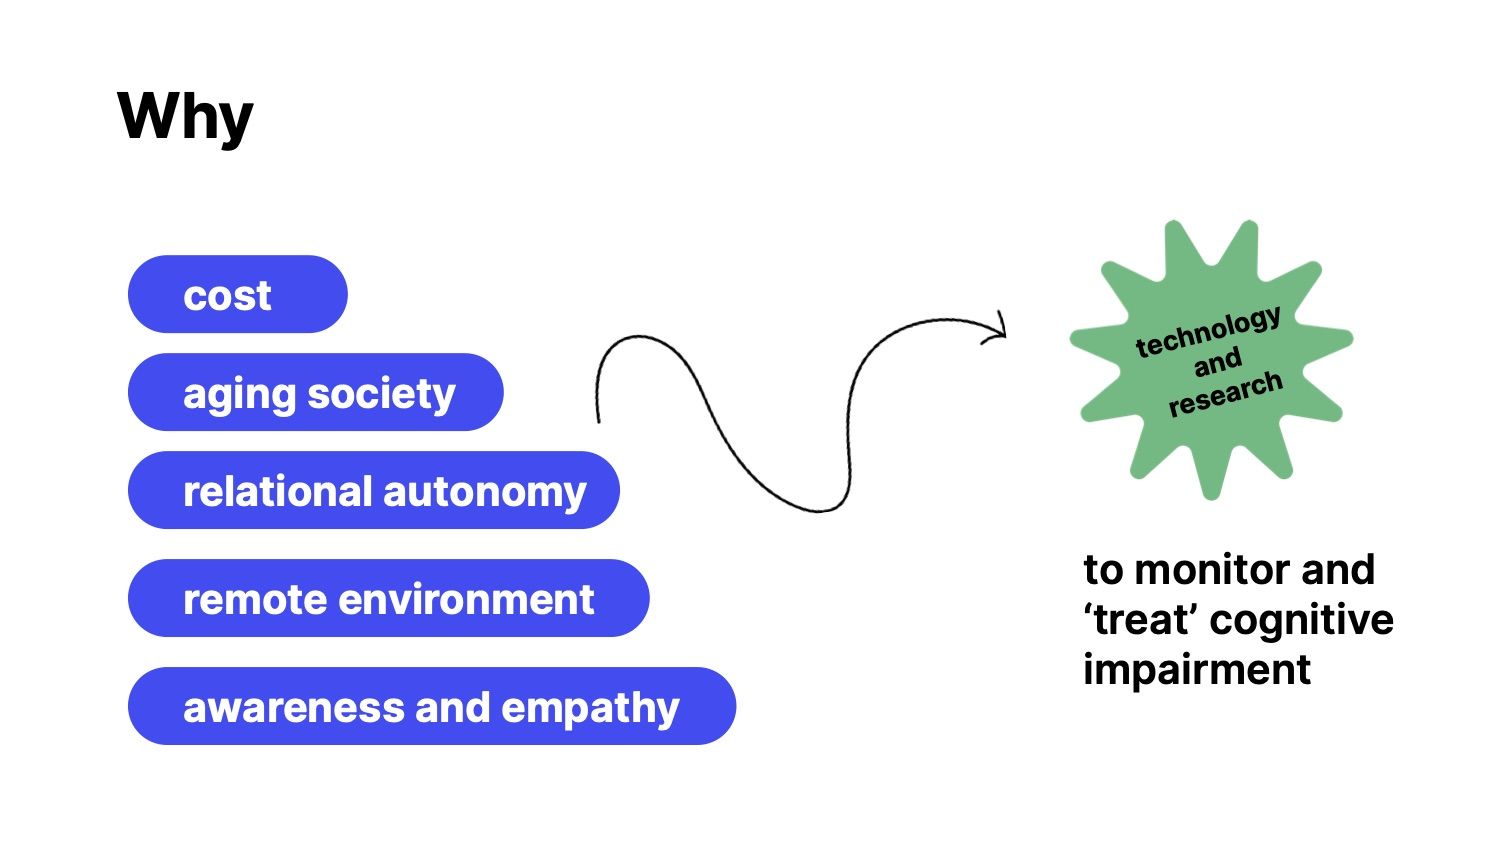 Diagram of why Mimi concept is done. Reasons are: cost, paging society, relational autonomy, remote environment, awareness and empathy